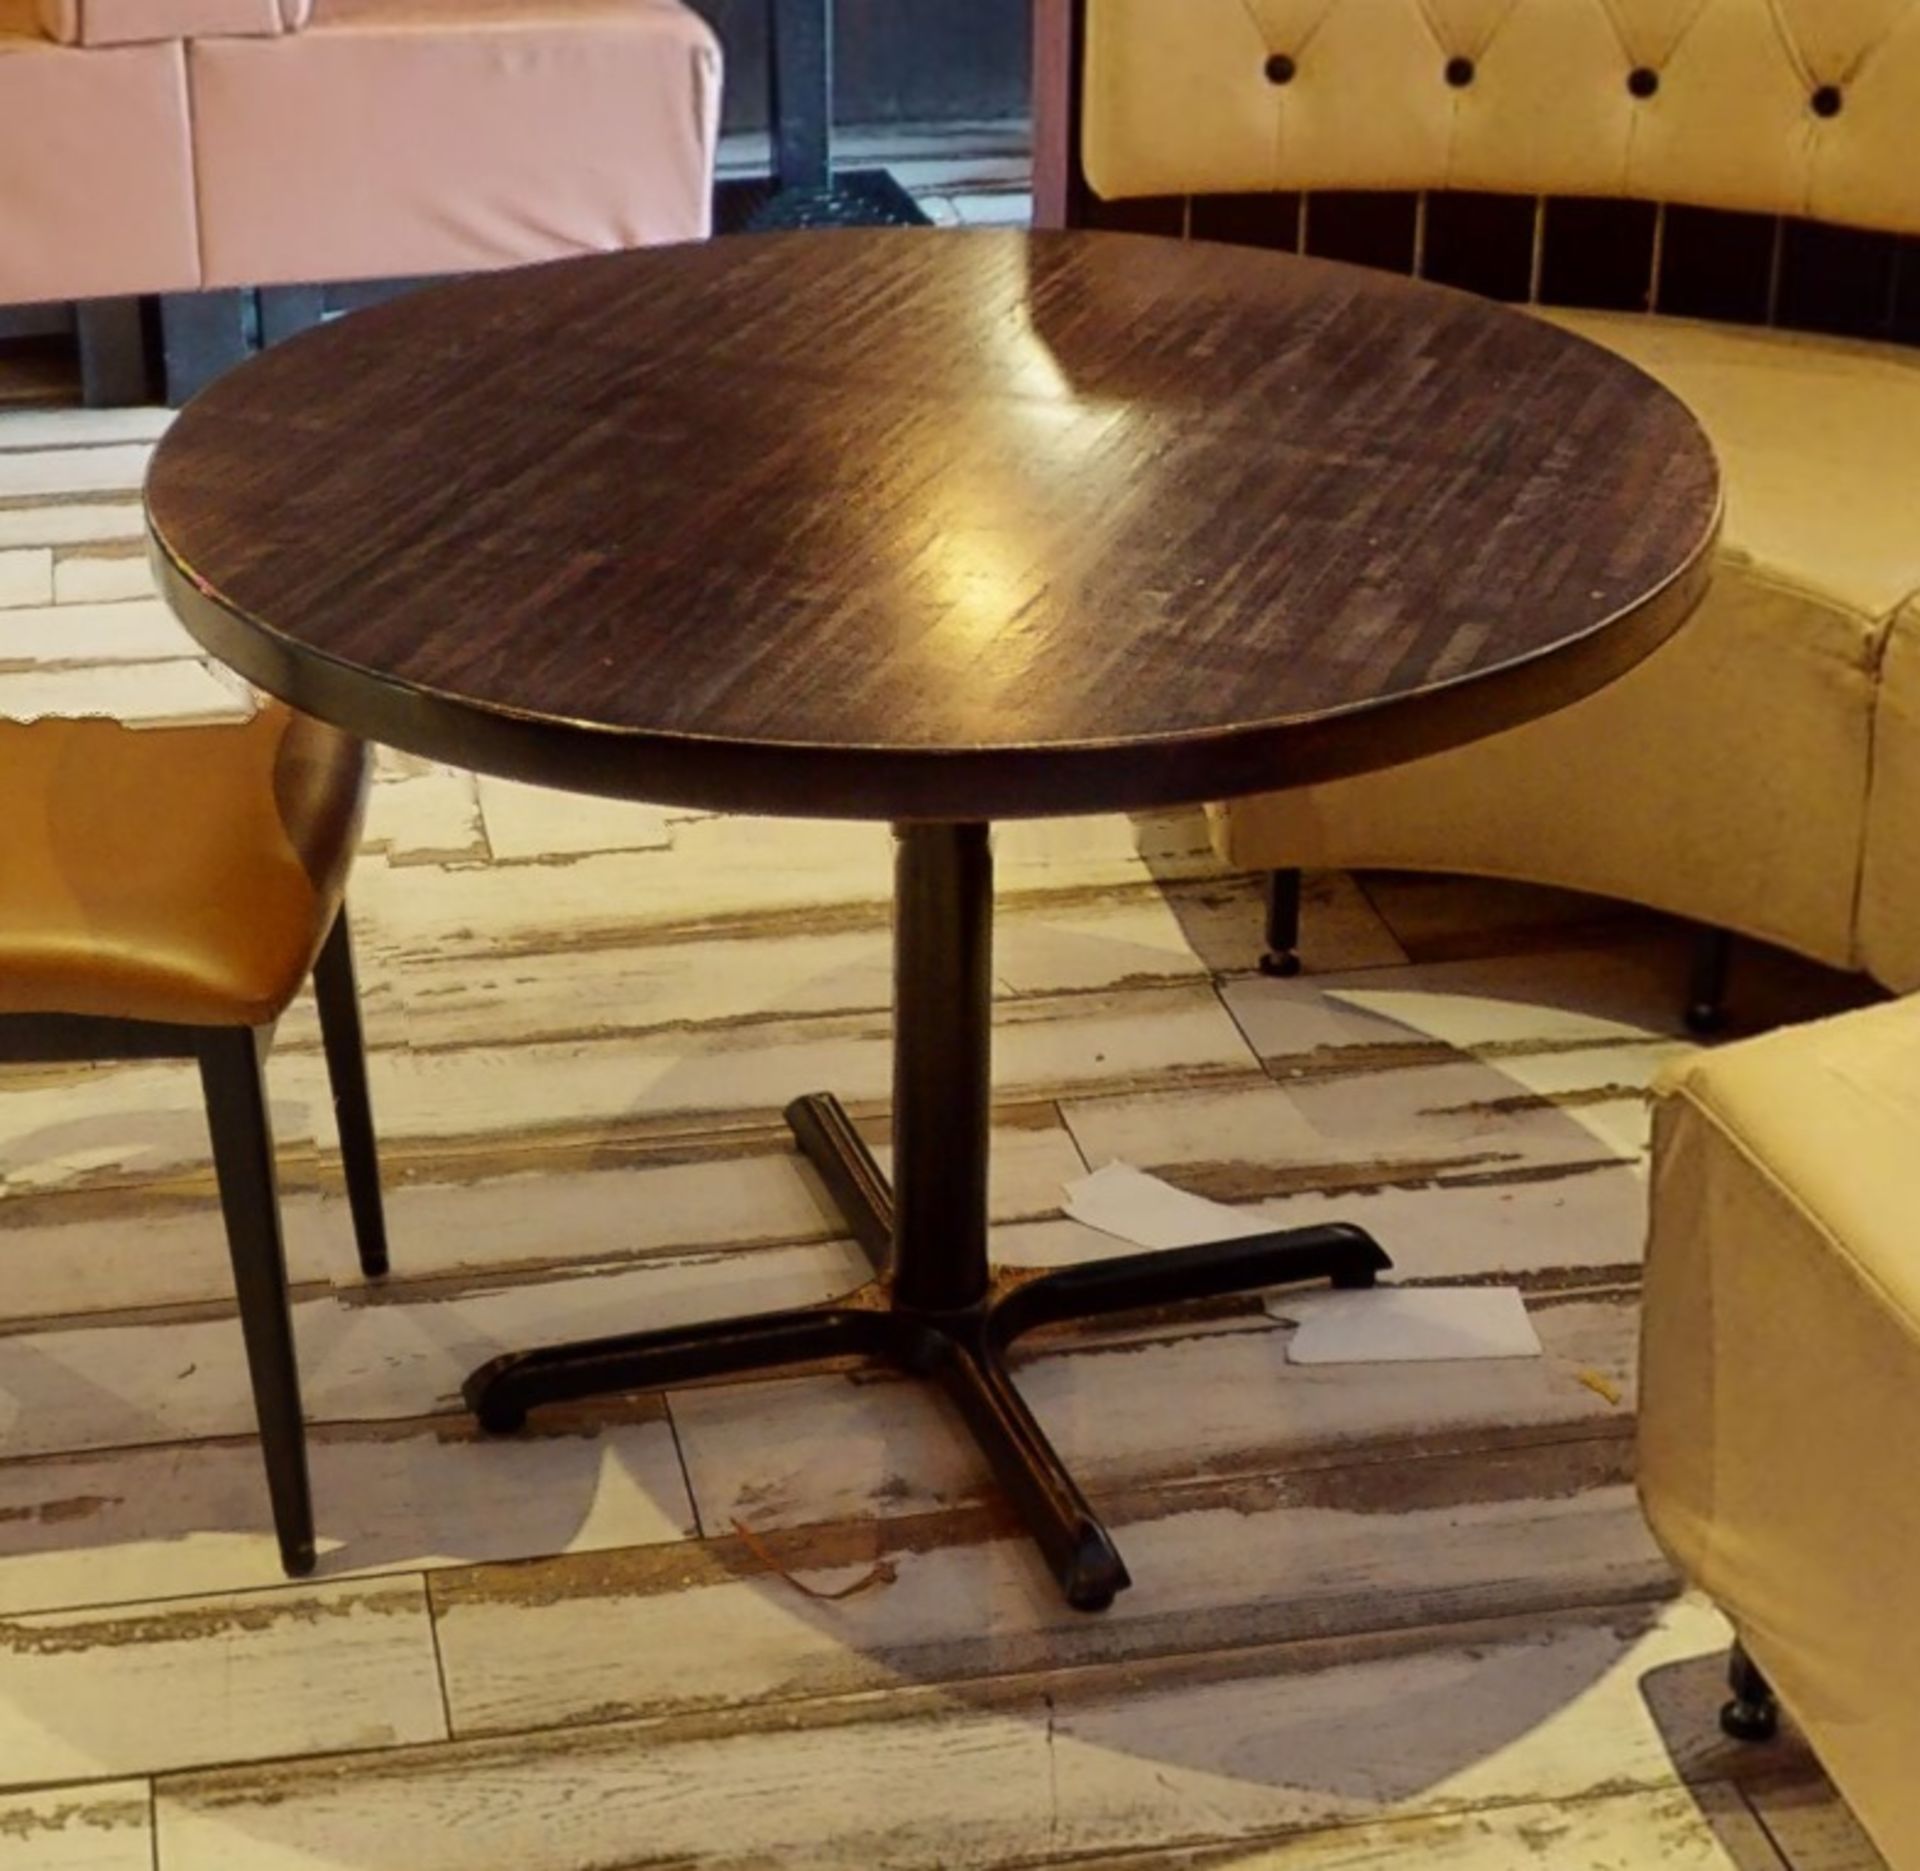 3 x Round Restaurant Tables With Dark Brown Wooden Tops and Cast Iron Bases